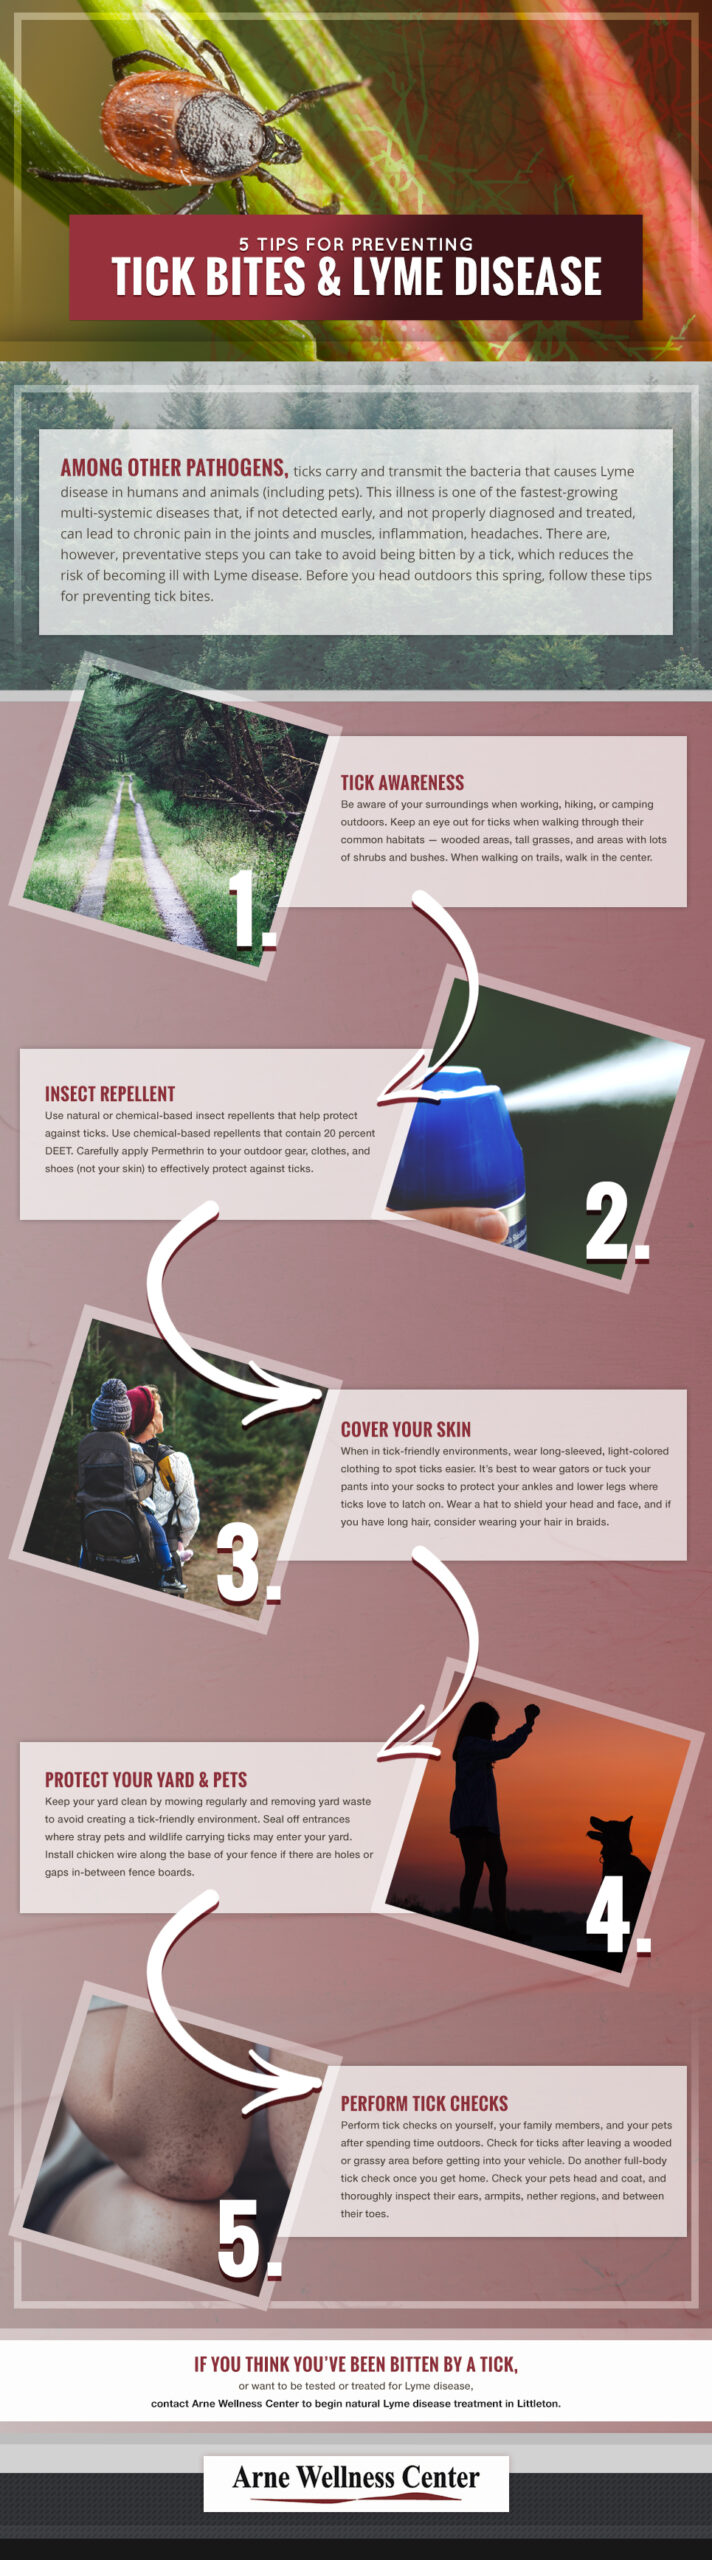 Infographic-5-Tips-for-Preventing-Tick-Bites-Lyme-Disease-5ac692f892765